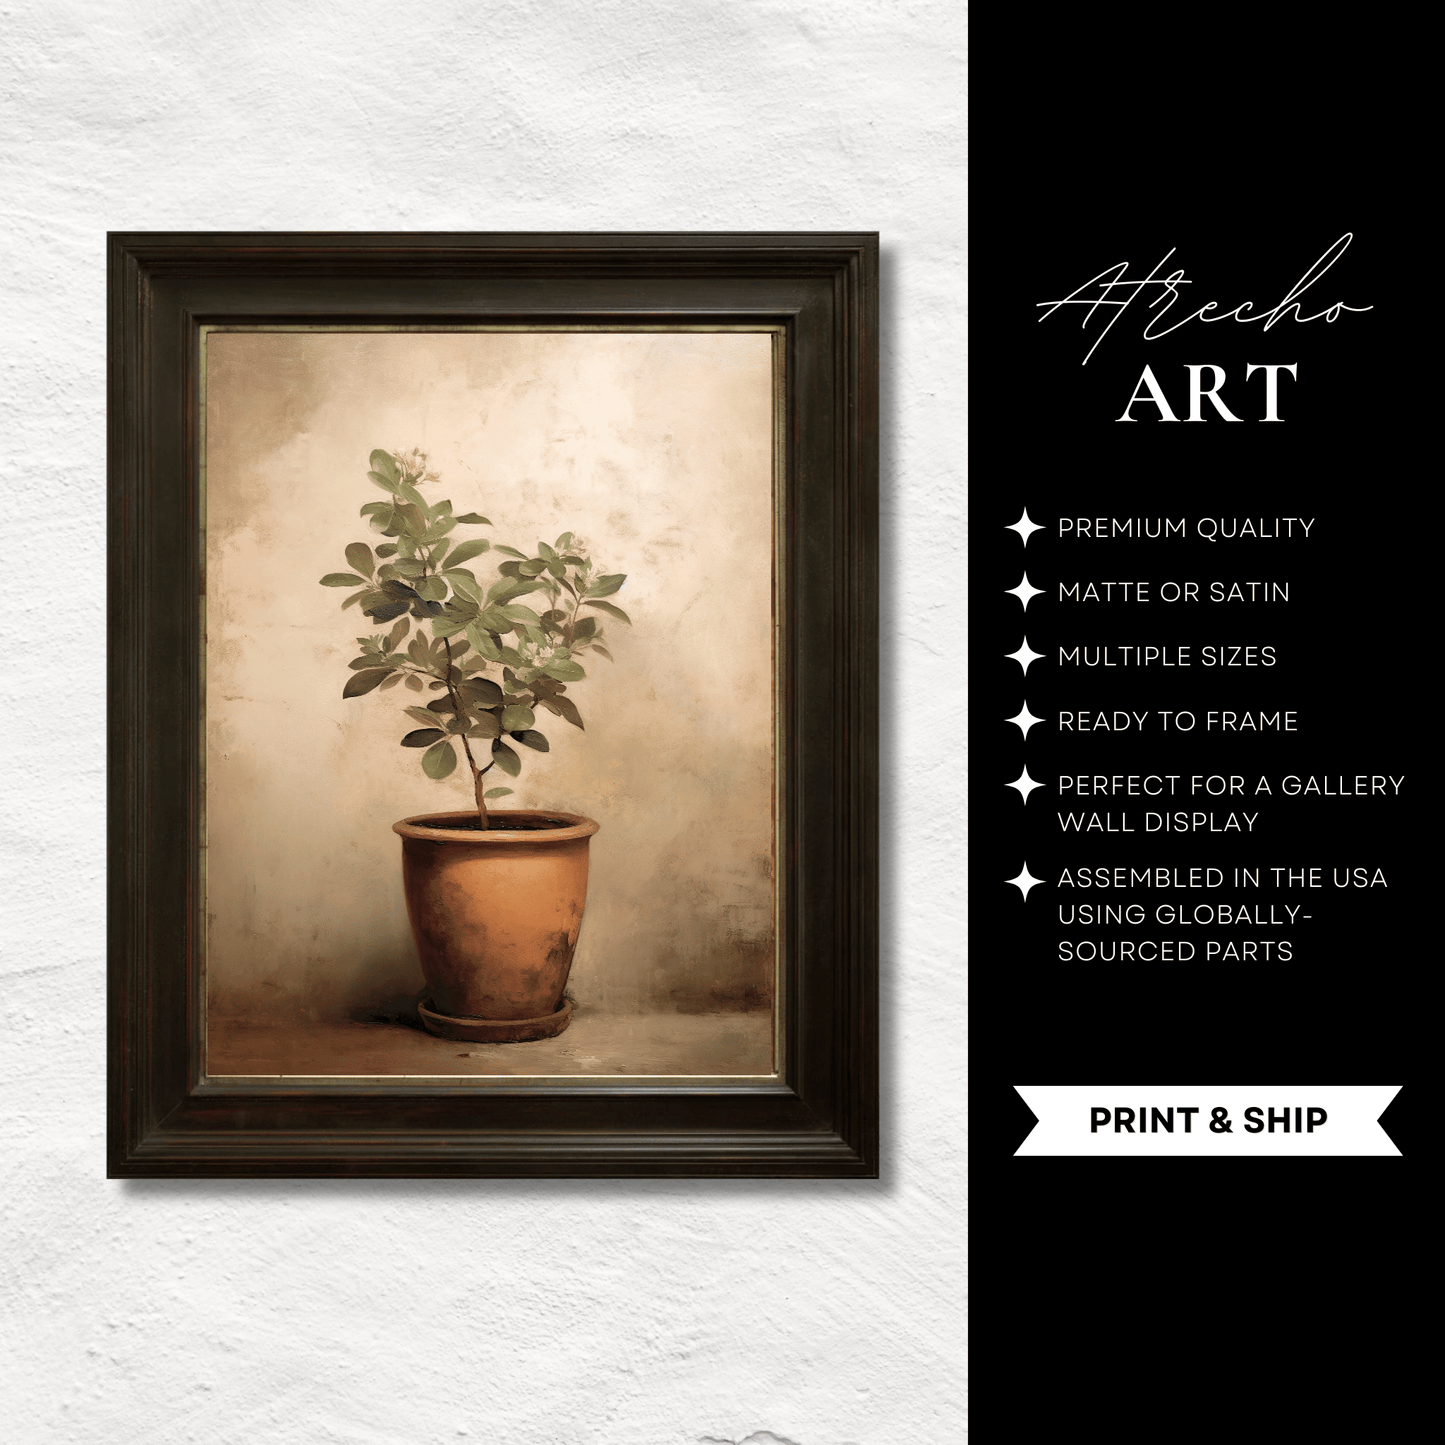 POTTED PLANT | Printed Artwork | TR18